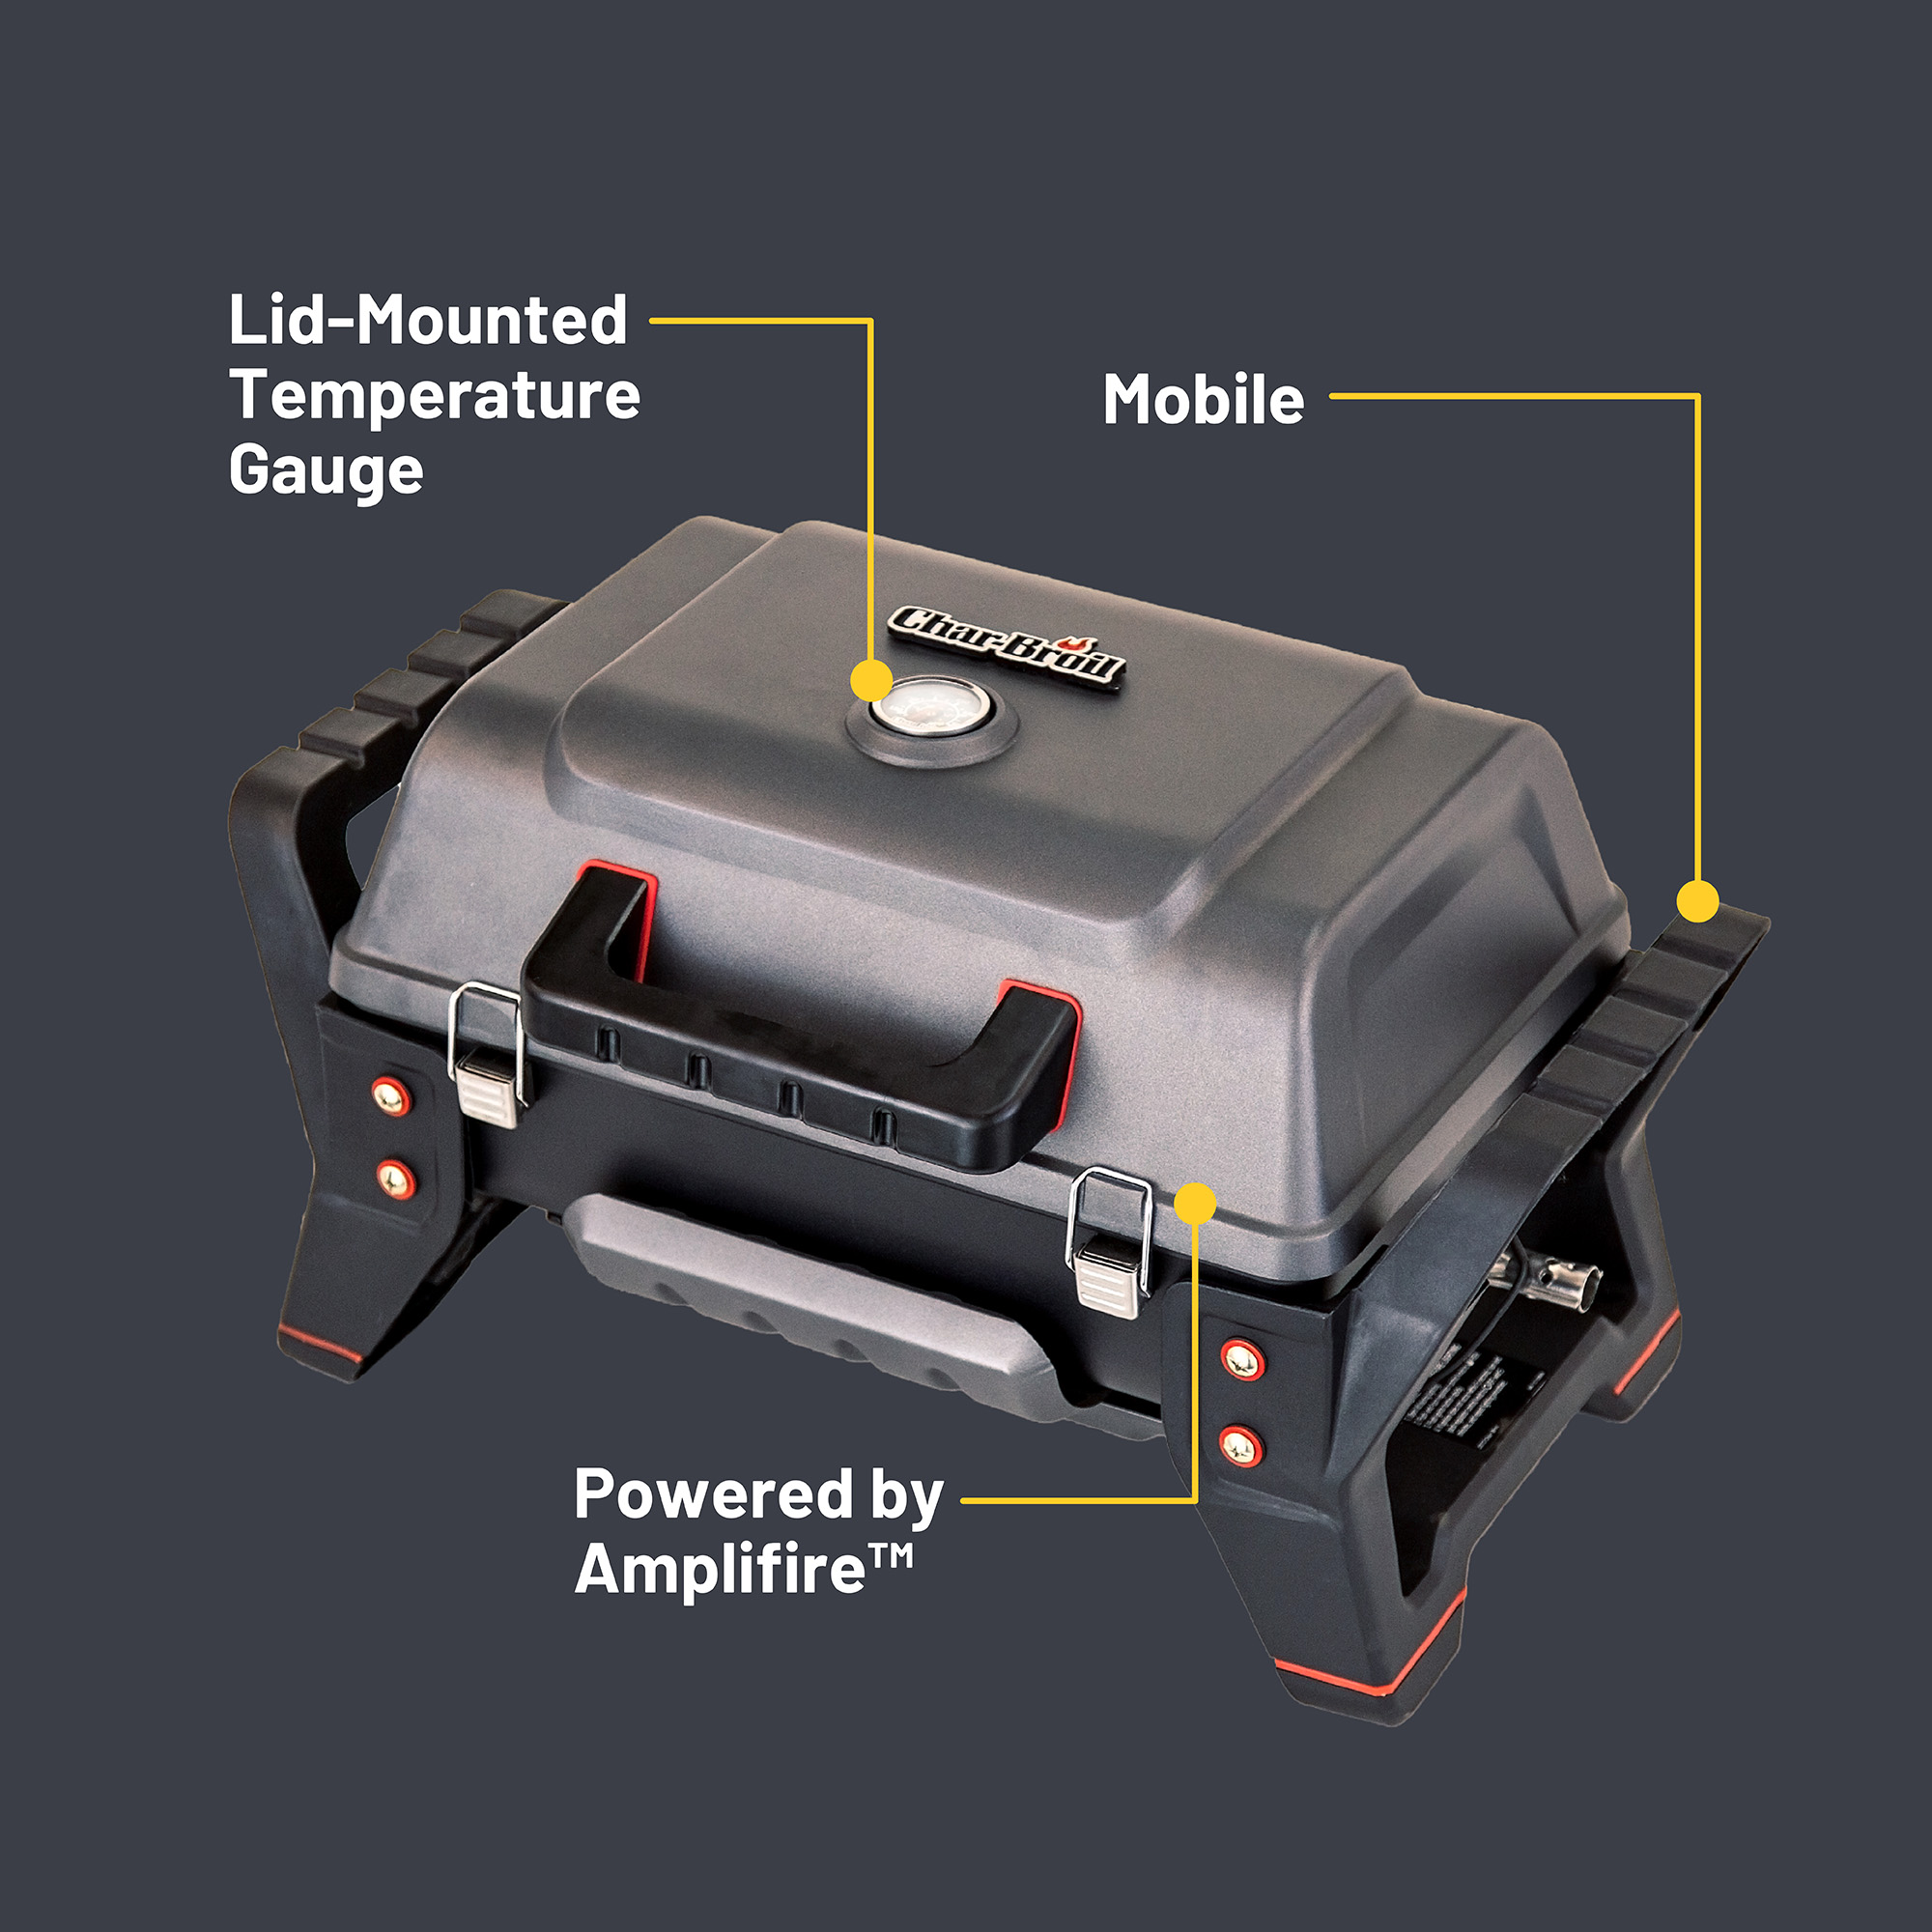 Char-Broil Grill2Go® Portable Gas Grill - image 3 of 12